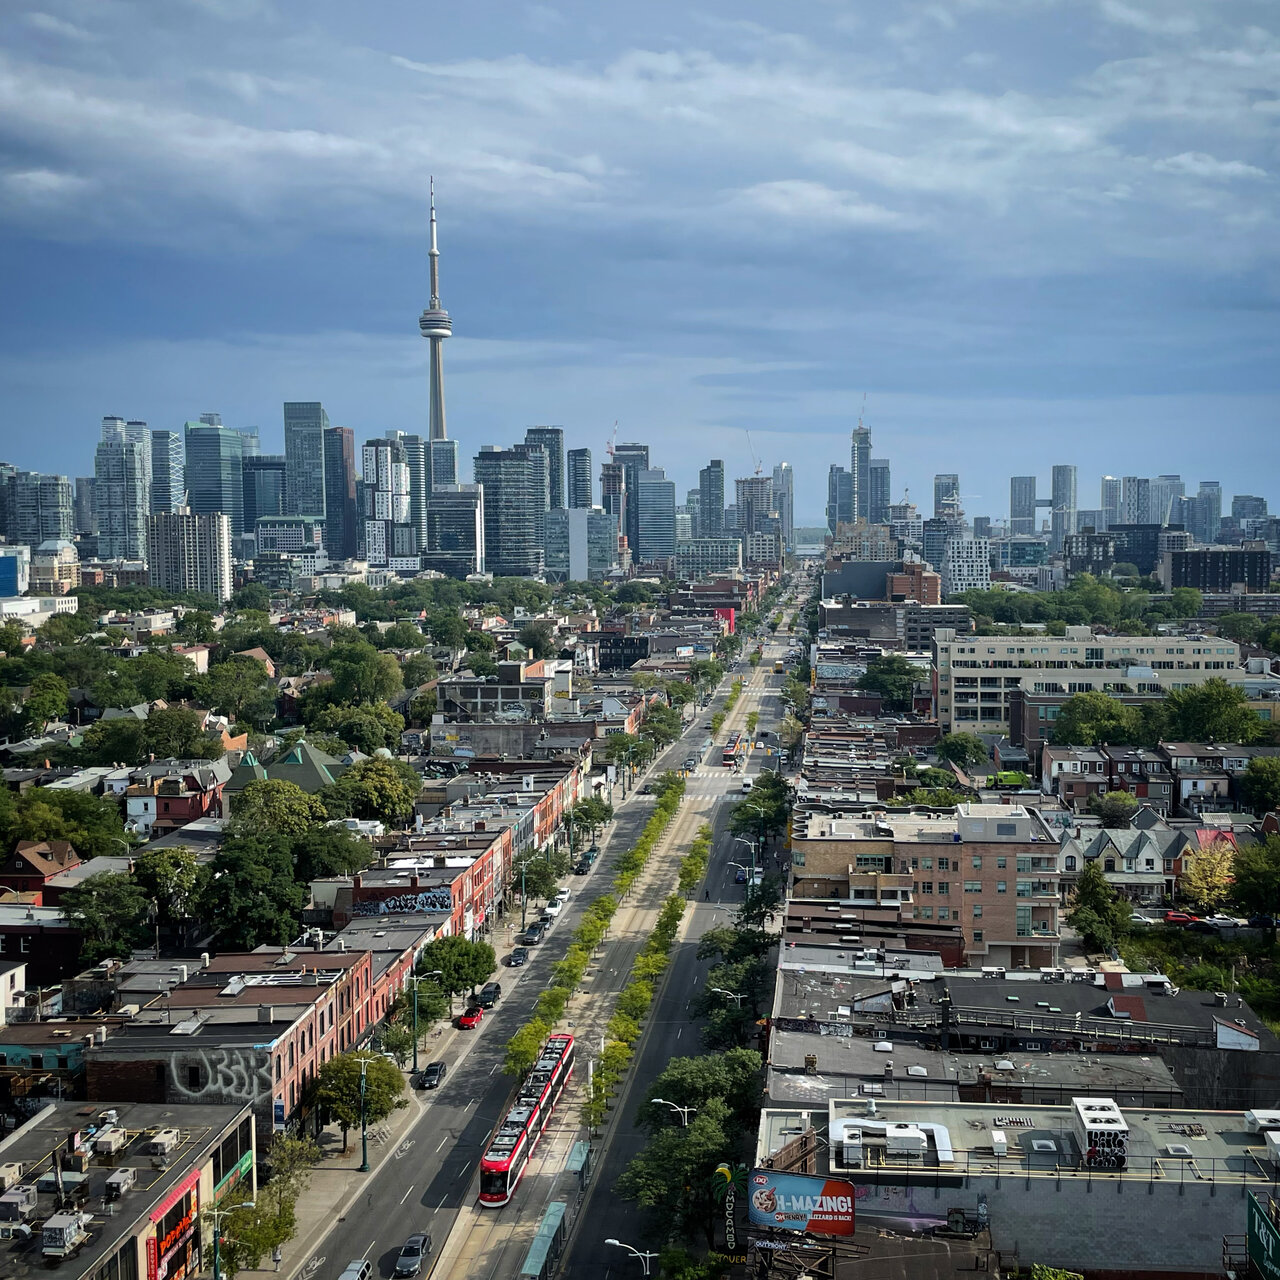 View from the Waverley at College and Spadina towards the Toronto skyline, image by UT Forum contributor thecharioteer